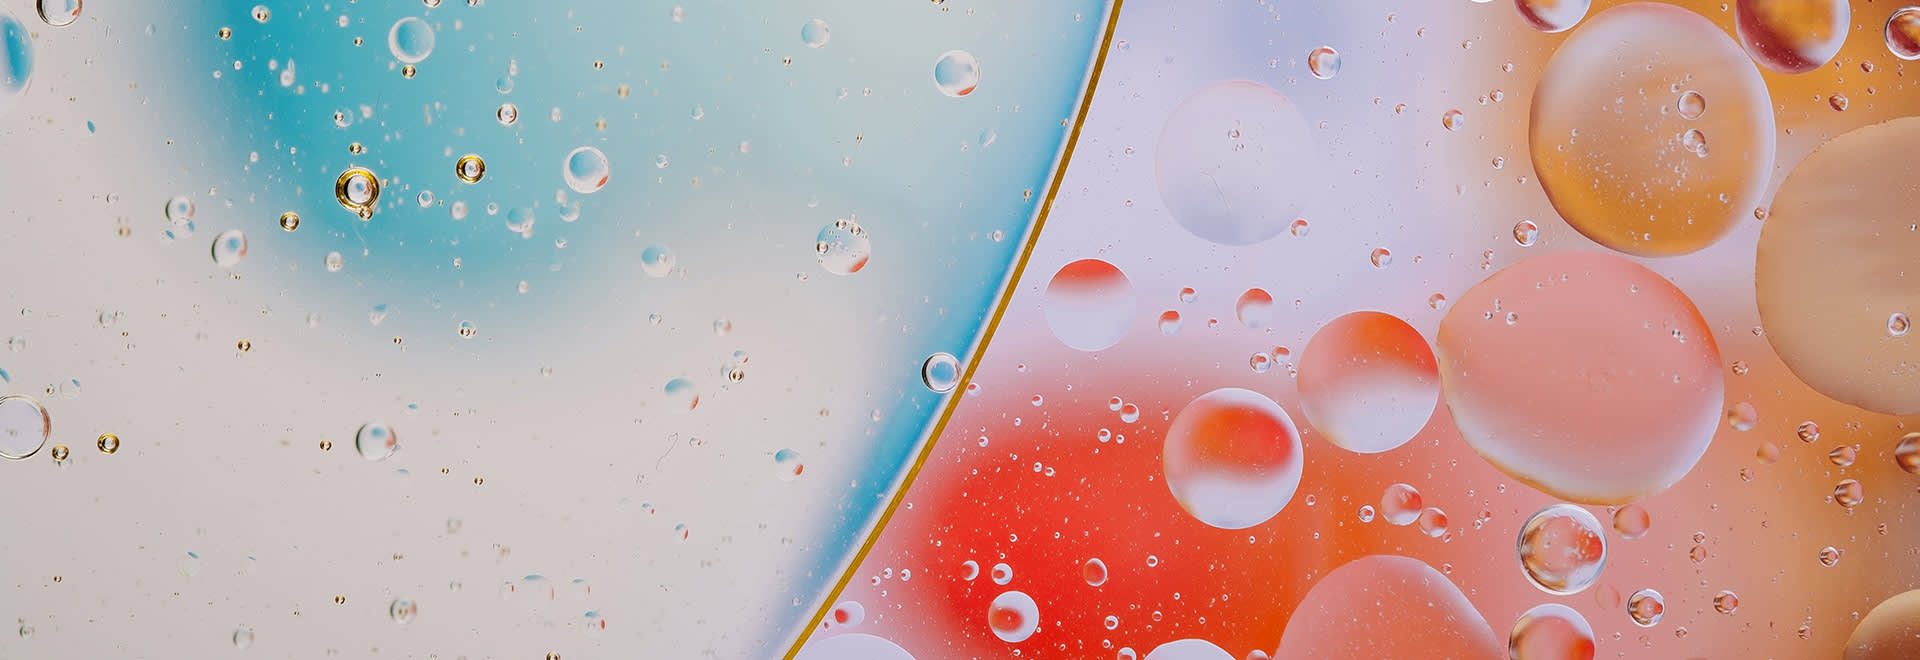 A picture of a colourful surface with water drops on it